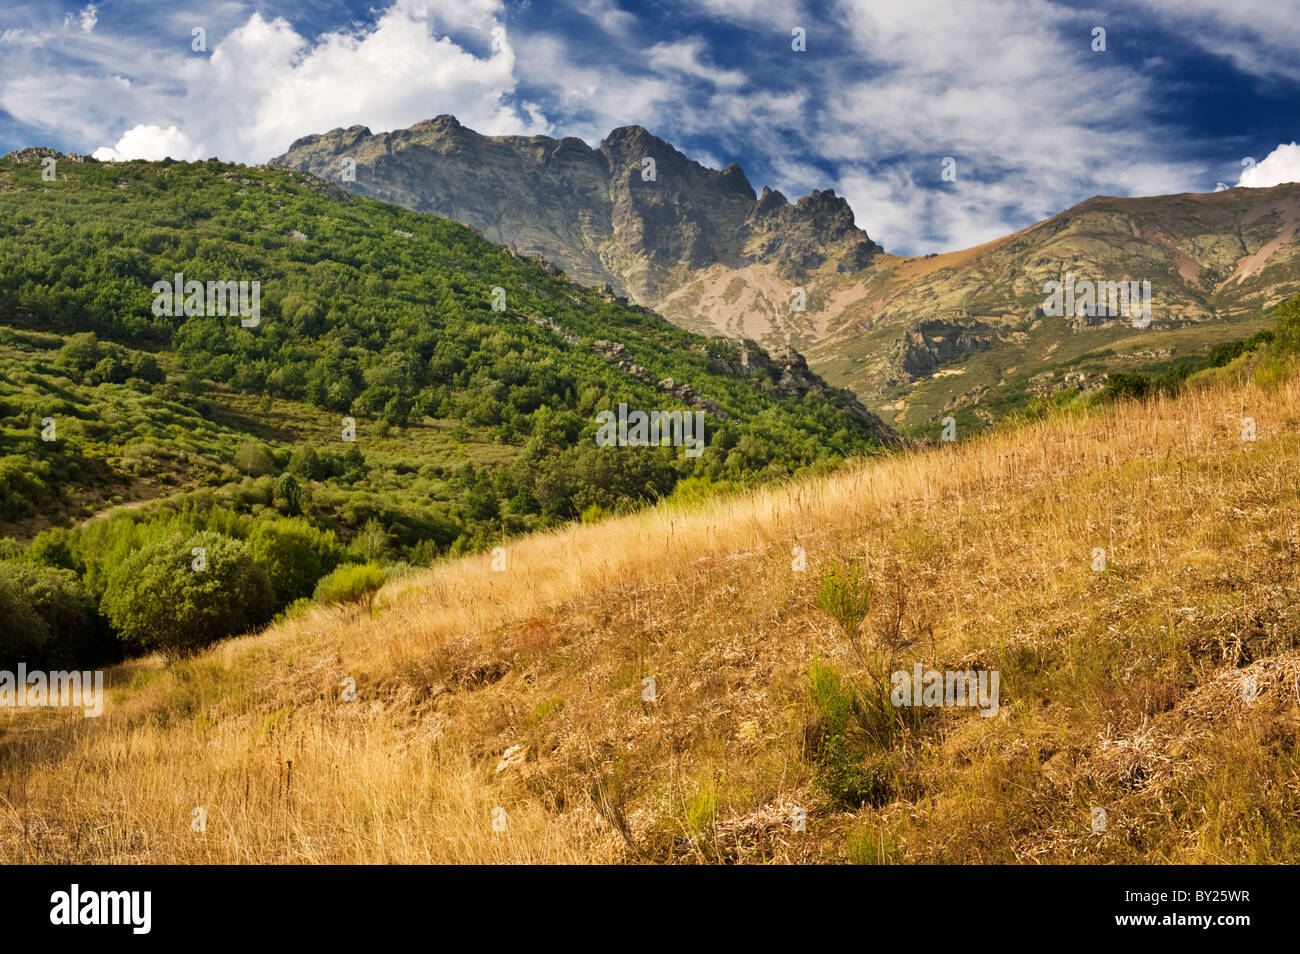 Looking towards Curavacas, the highest peak in the Palentine Mountains, part of the Cantabrian Mountain Range of northern Spain Stock Photo